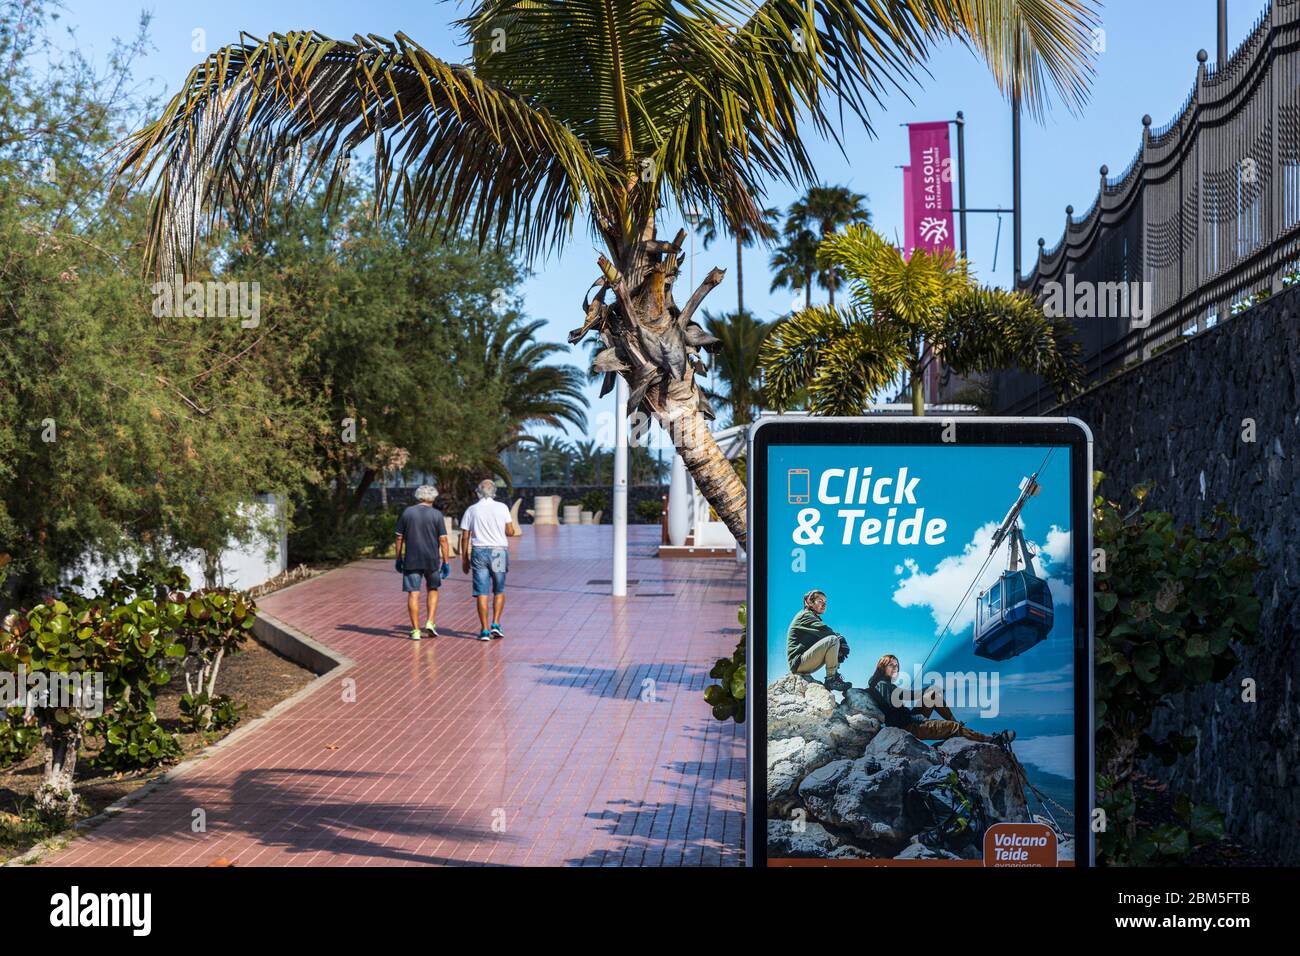 Poster advertising trips on the cable car to the top of Teide volcano on the promenade in Playa fanabe during the Covid 19 State of Emergency in Costa Stock Photo